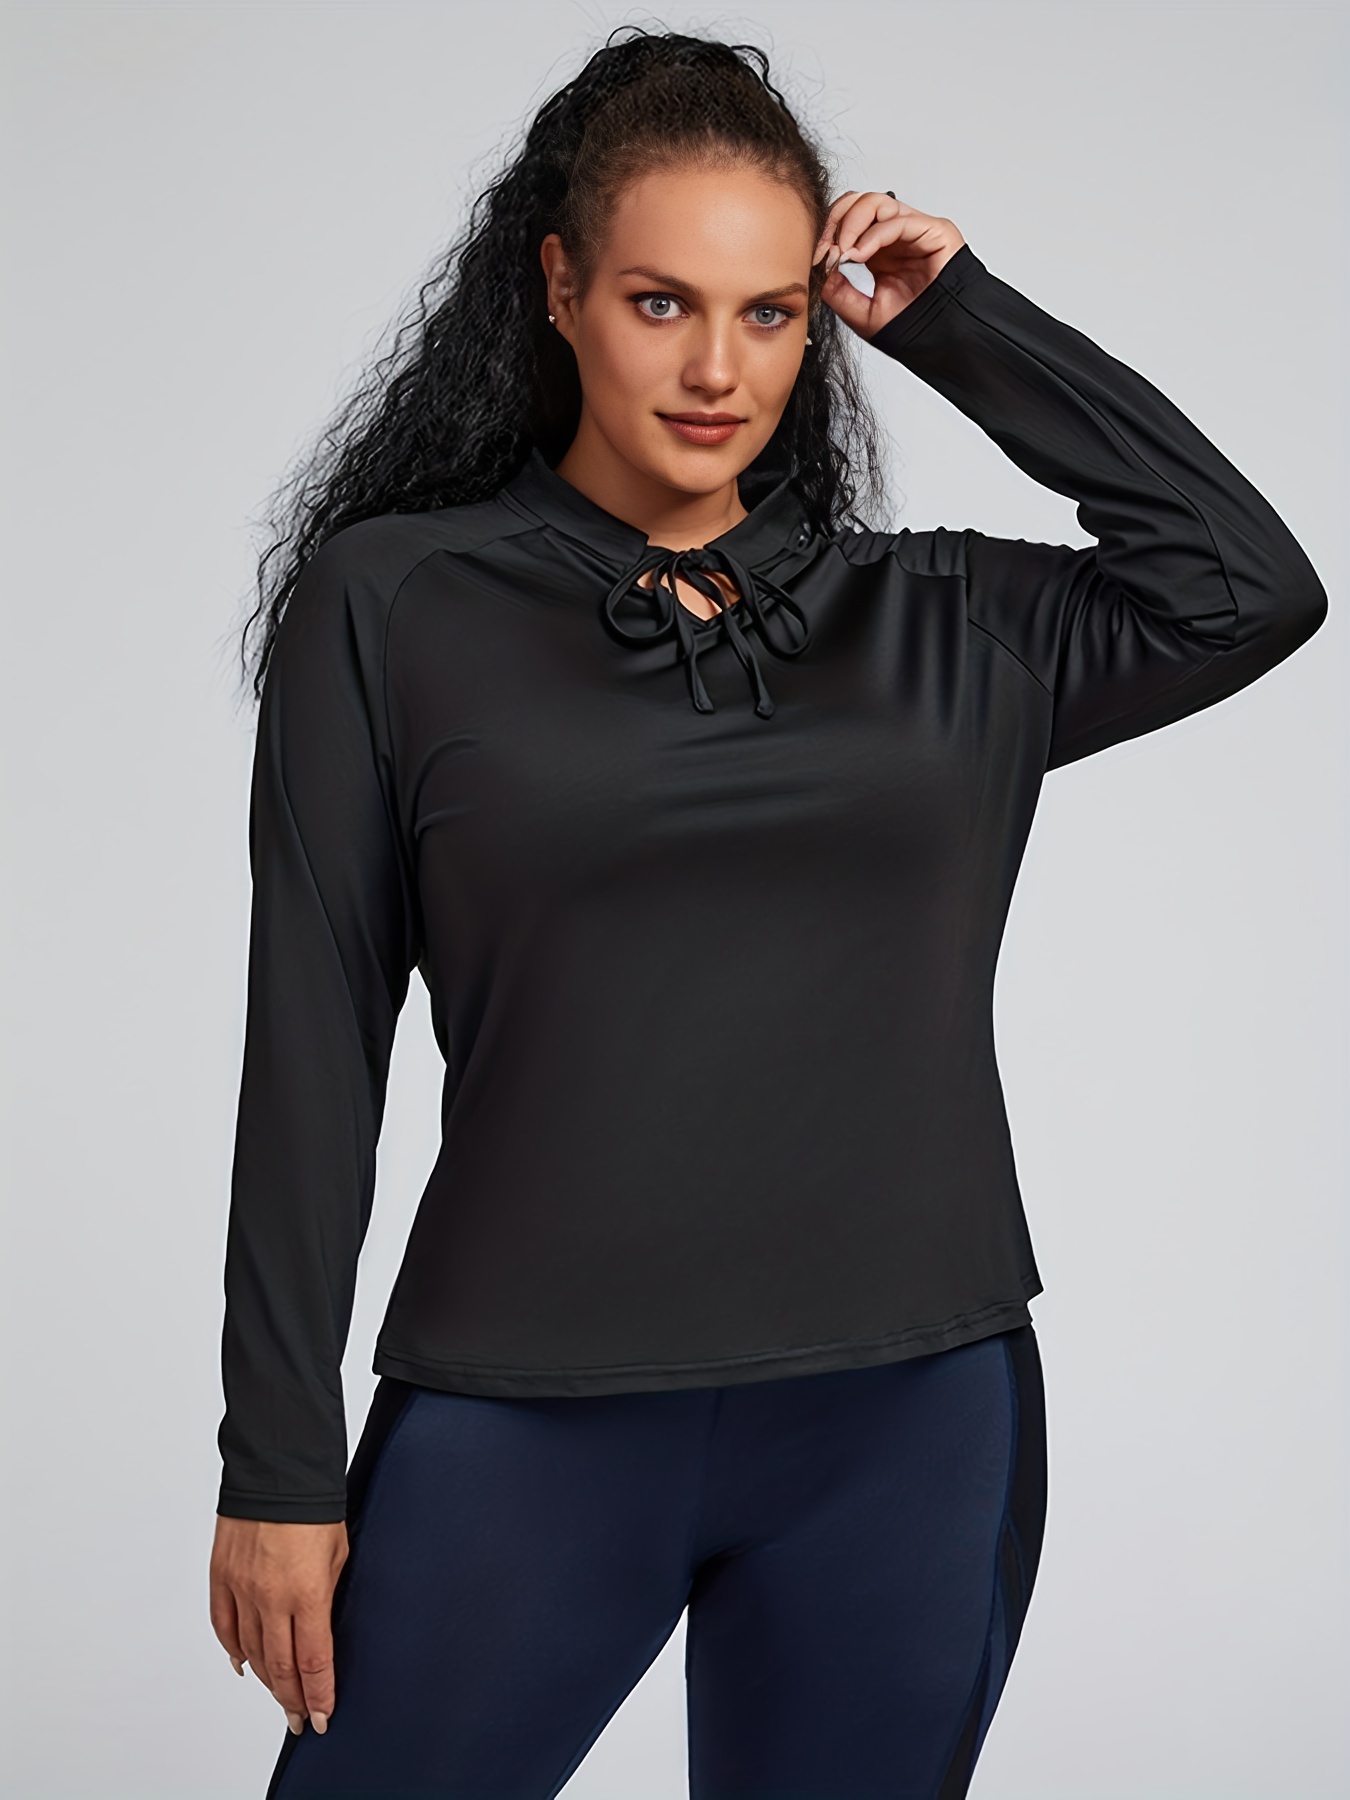 Plus Size Sports Top, Women's Plus Solid Long Sleeve Quick-drying Keyhole  Tie Top